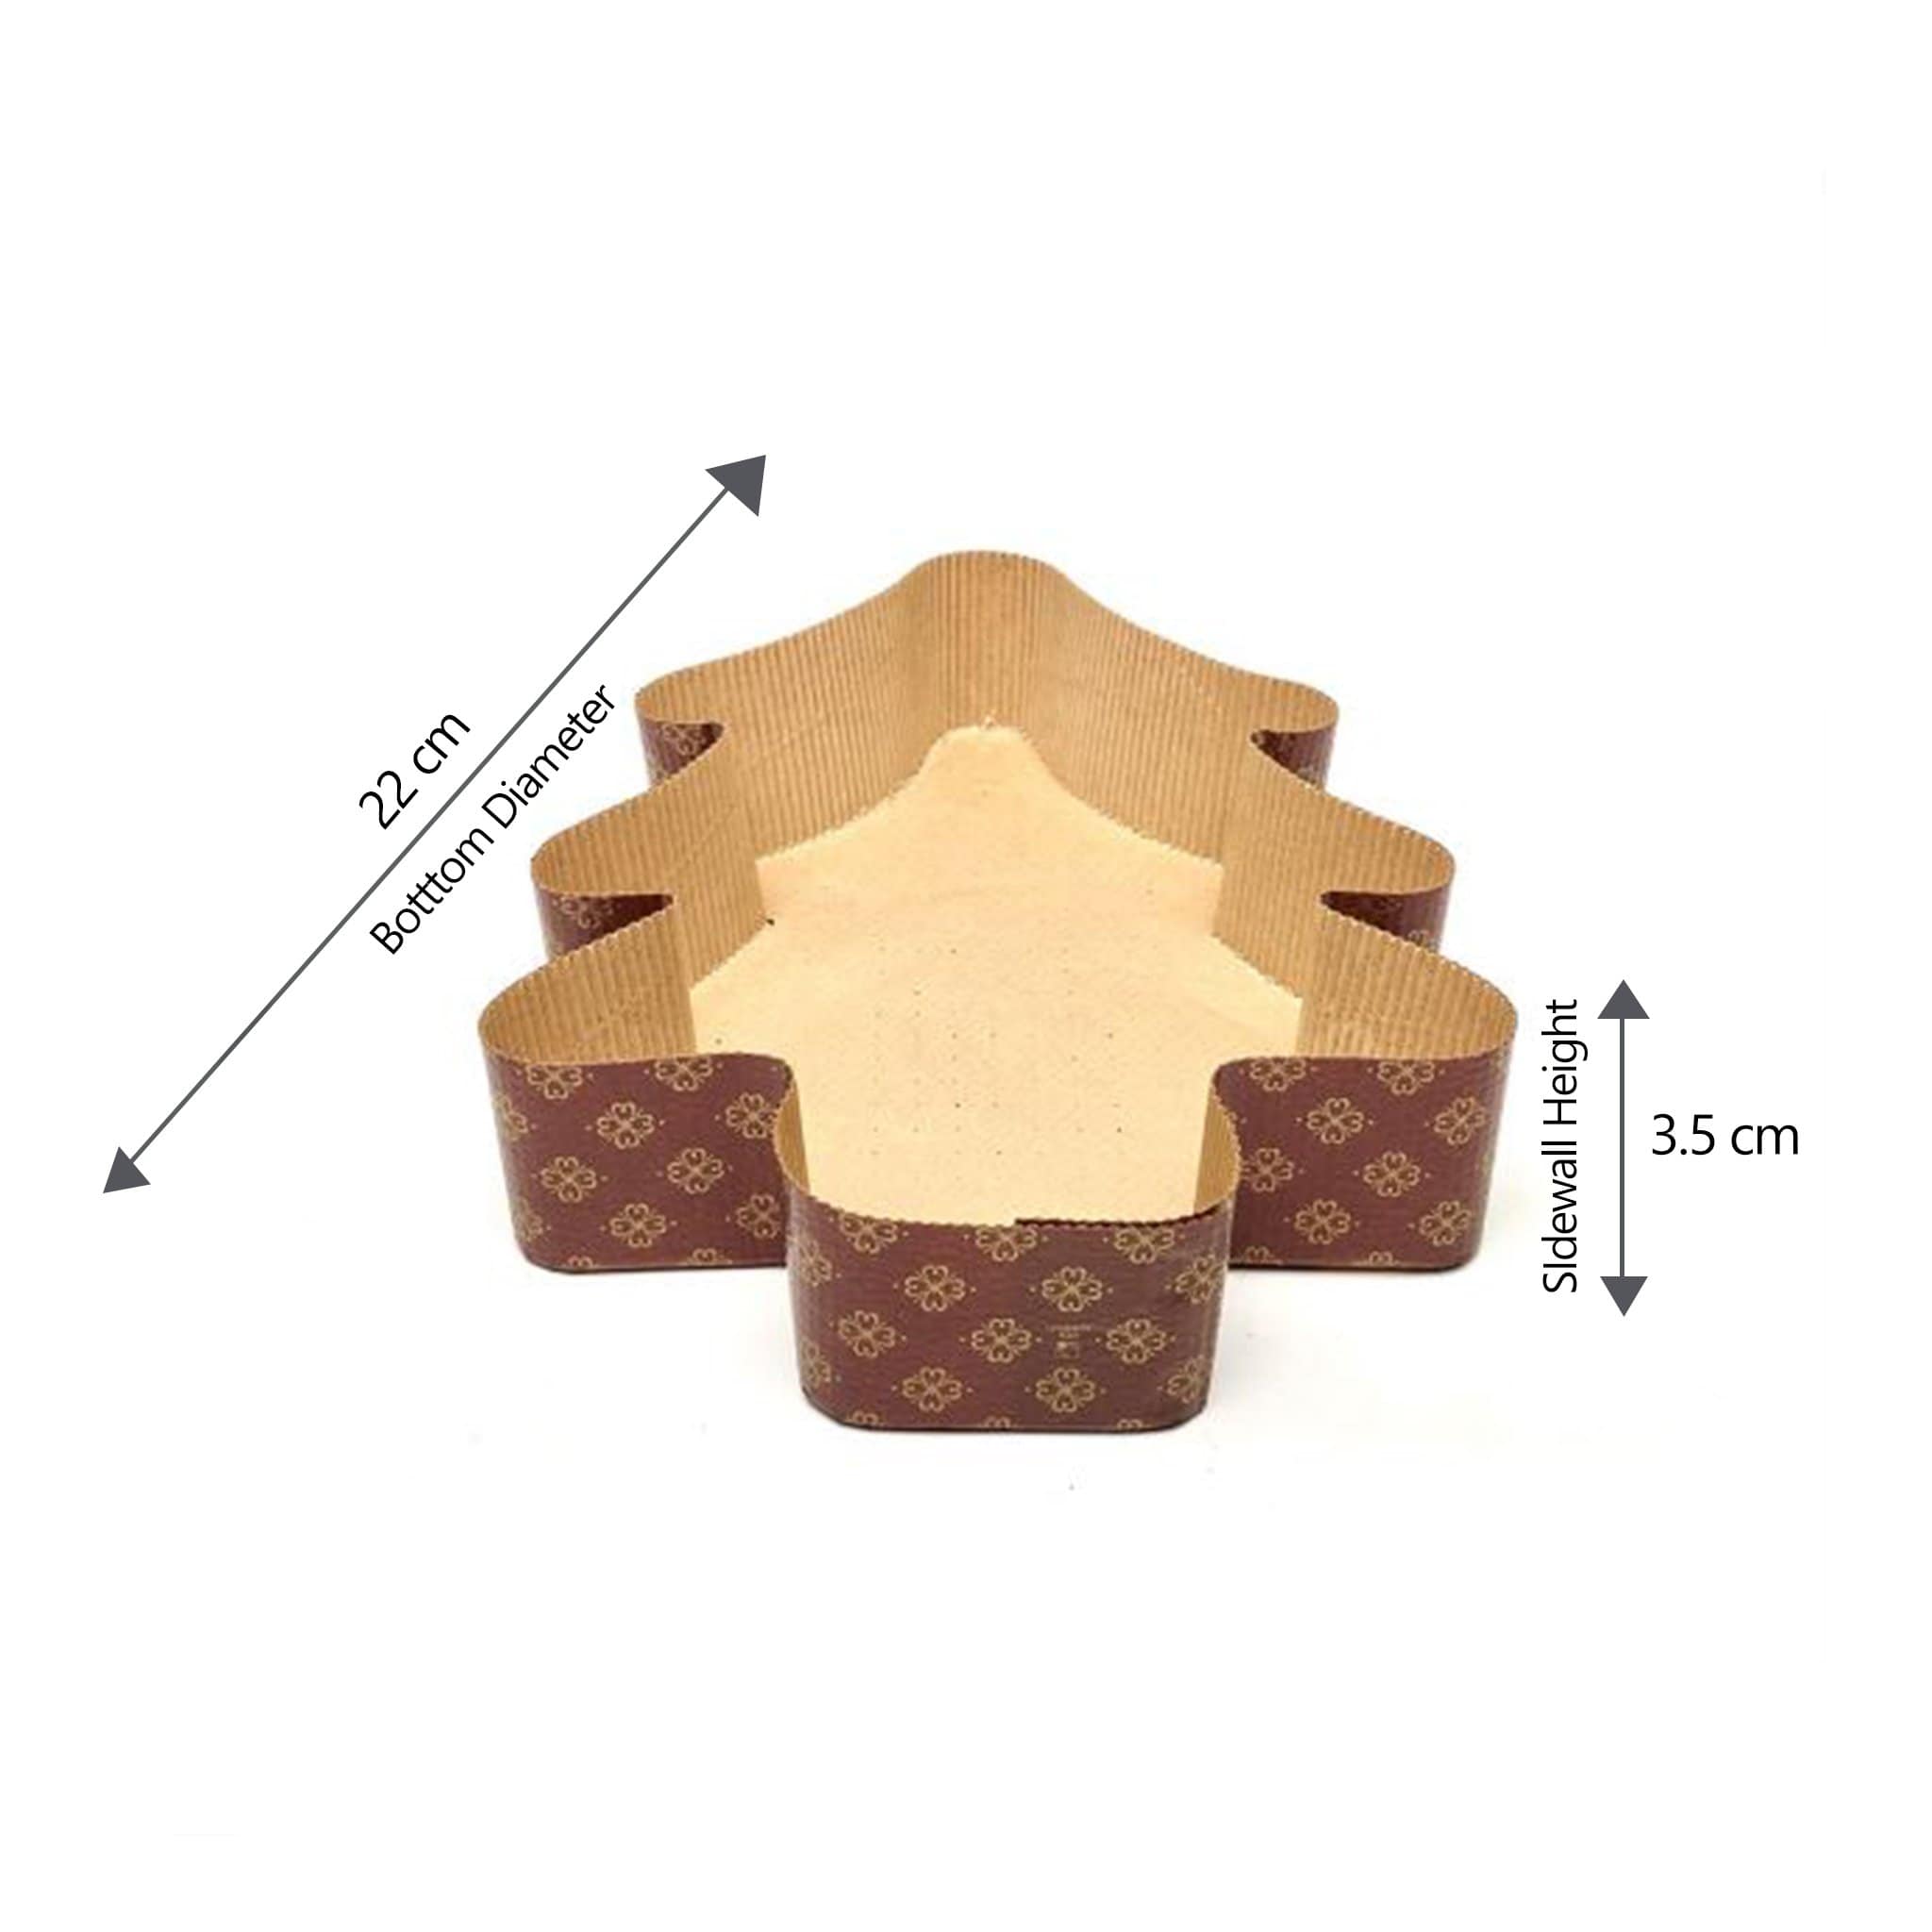 Hotpack |Baking Mold Tree Shape  16x3.5 cm |200 Pieces - Hotpack Global